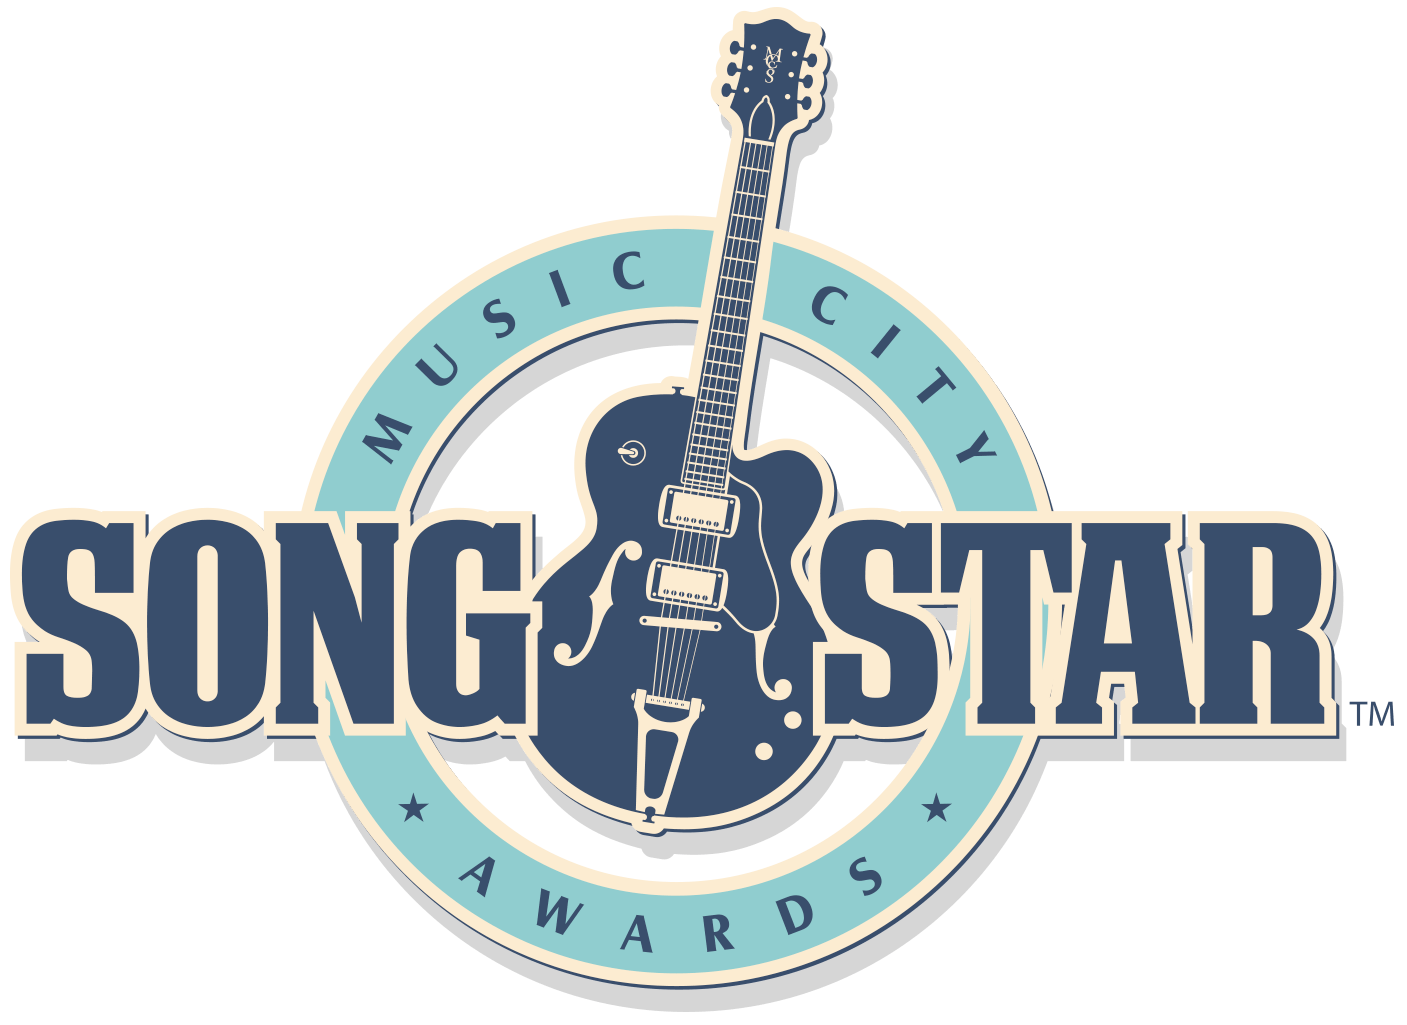 Musical Star Logo - Songwriting Contest for Songwriters Worldwide | Music City SongStar